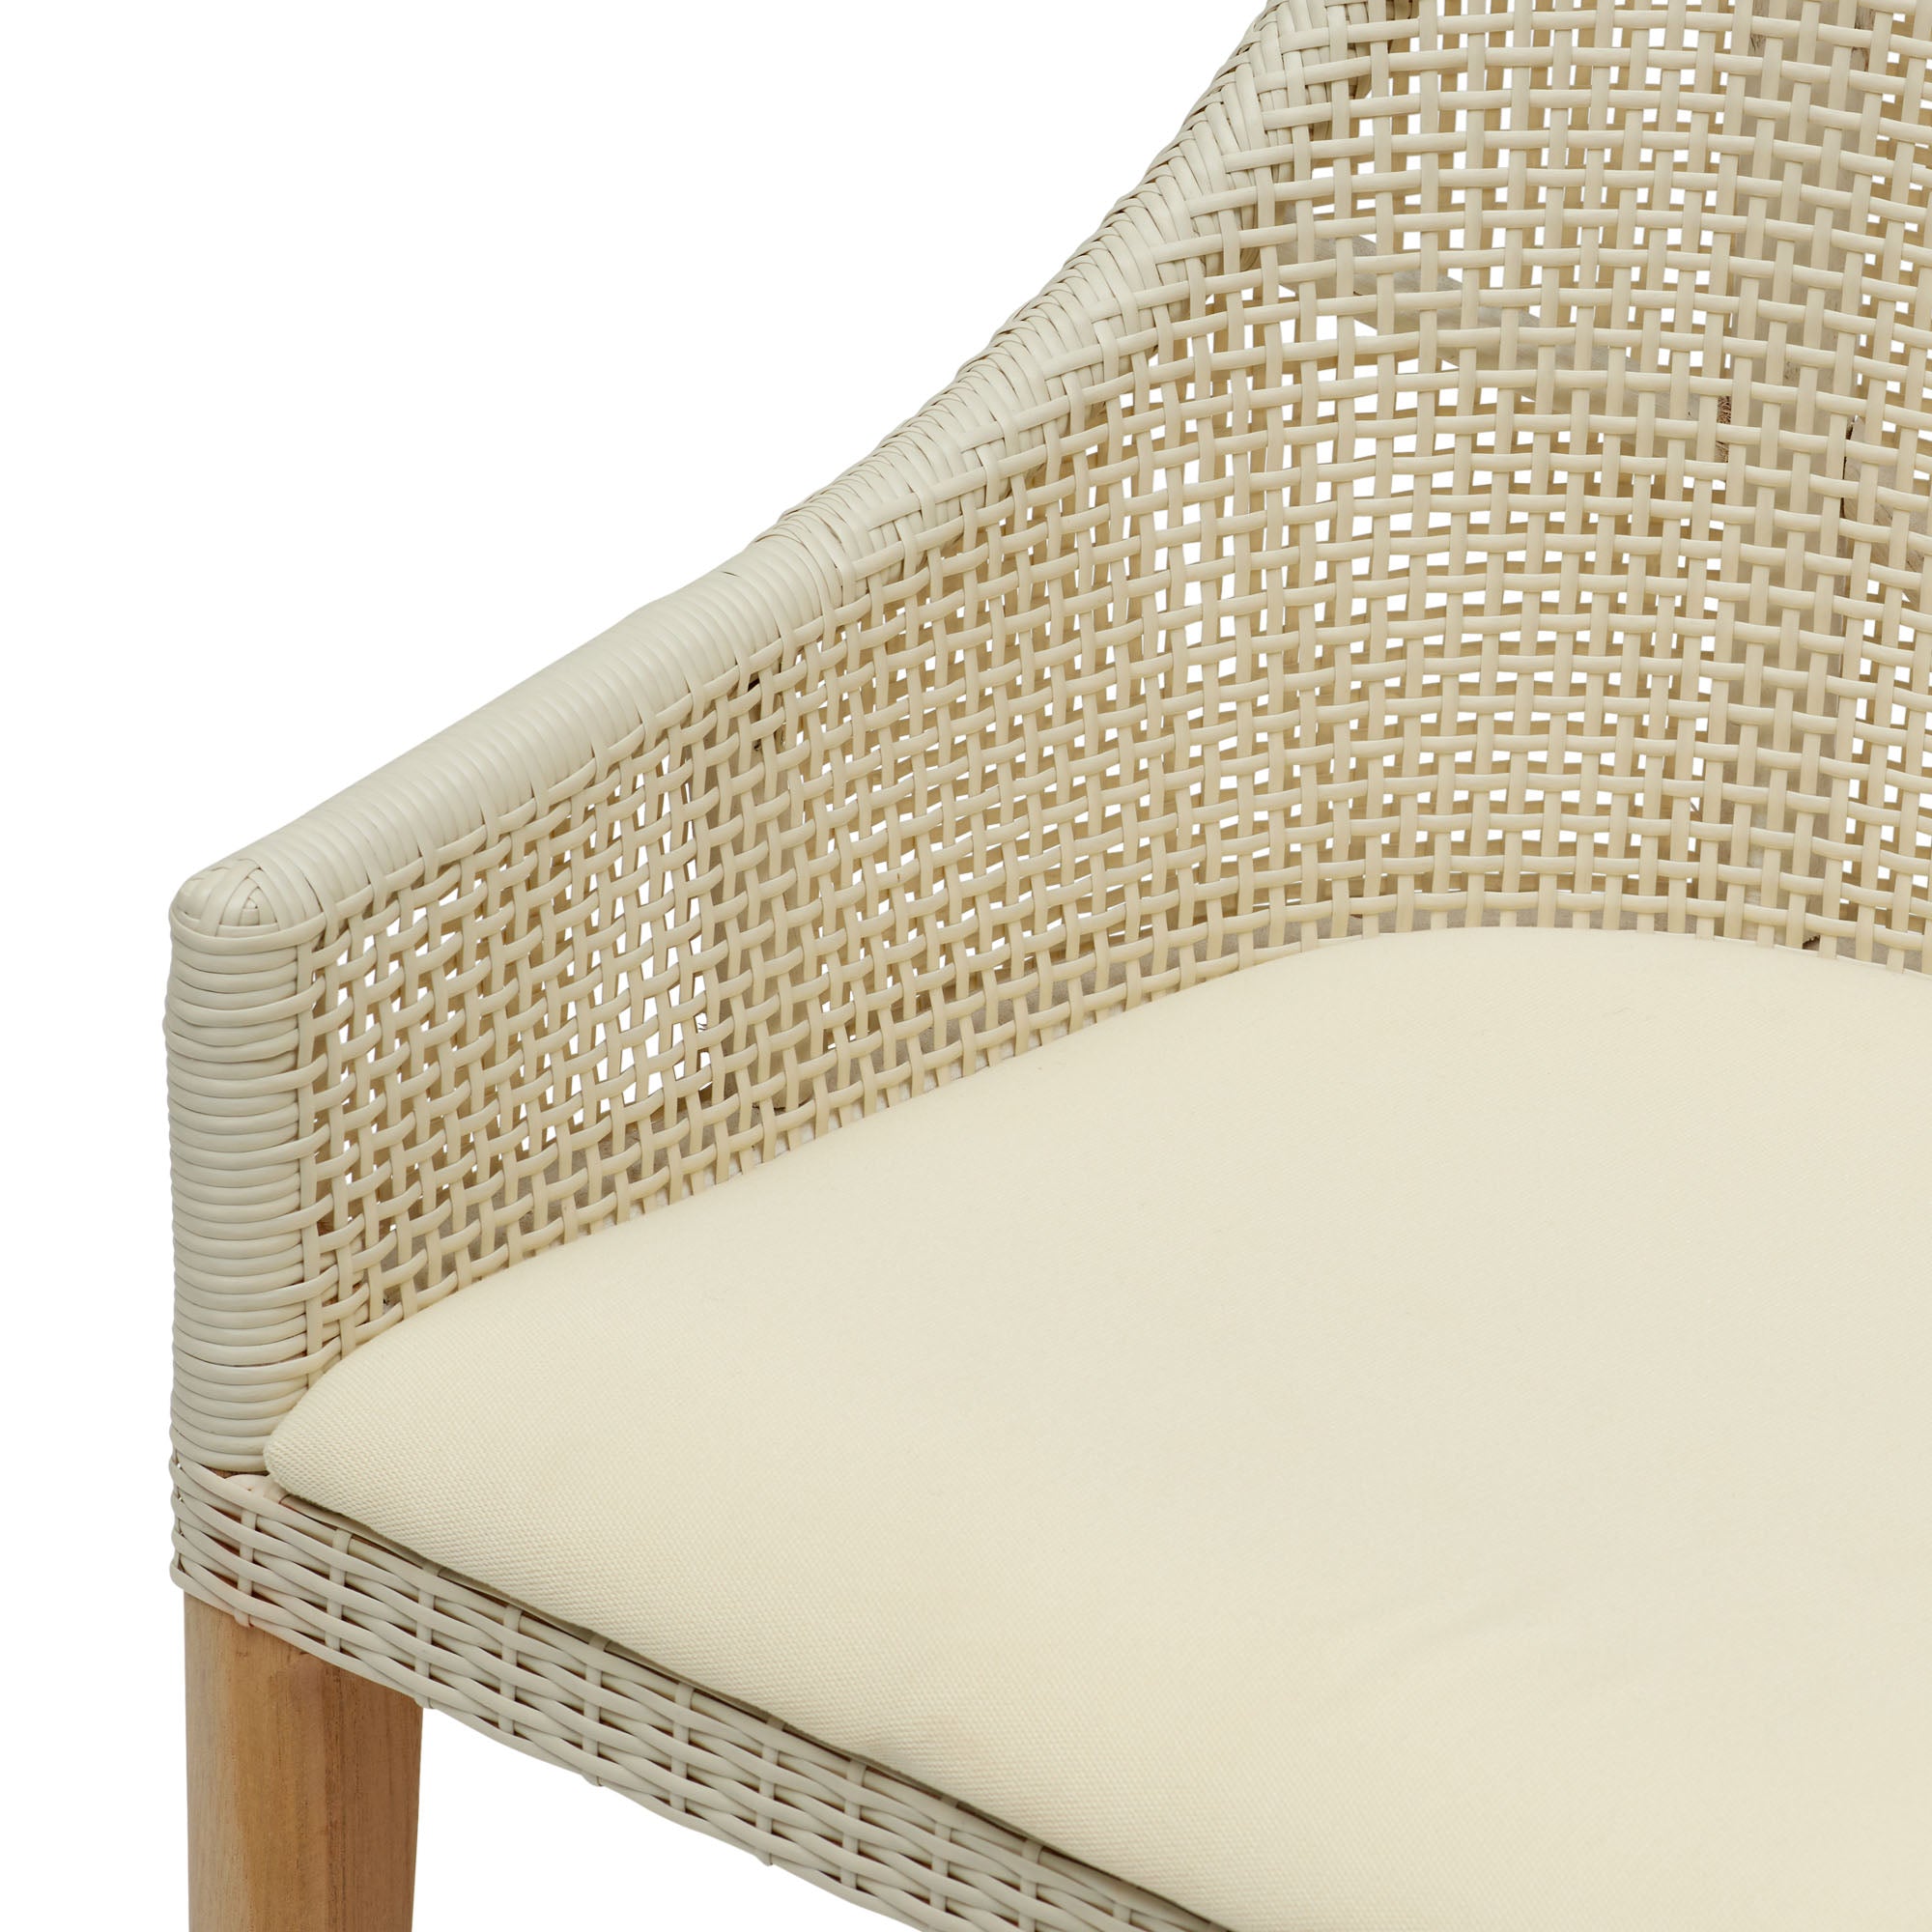 Remi Outdoor Dining Chair White